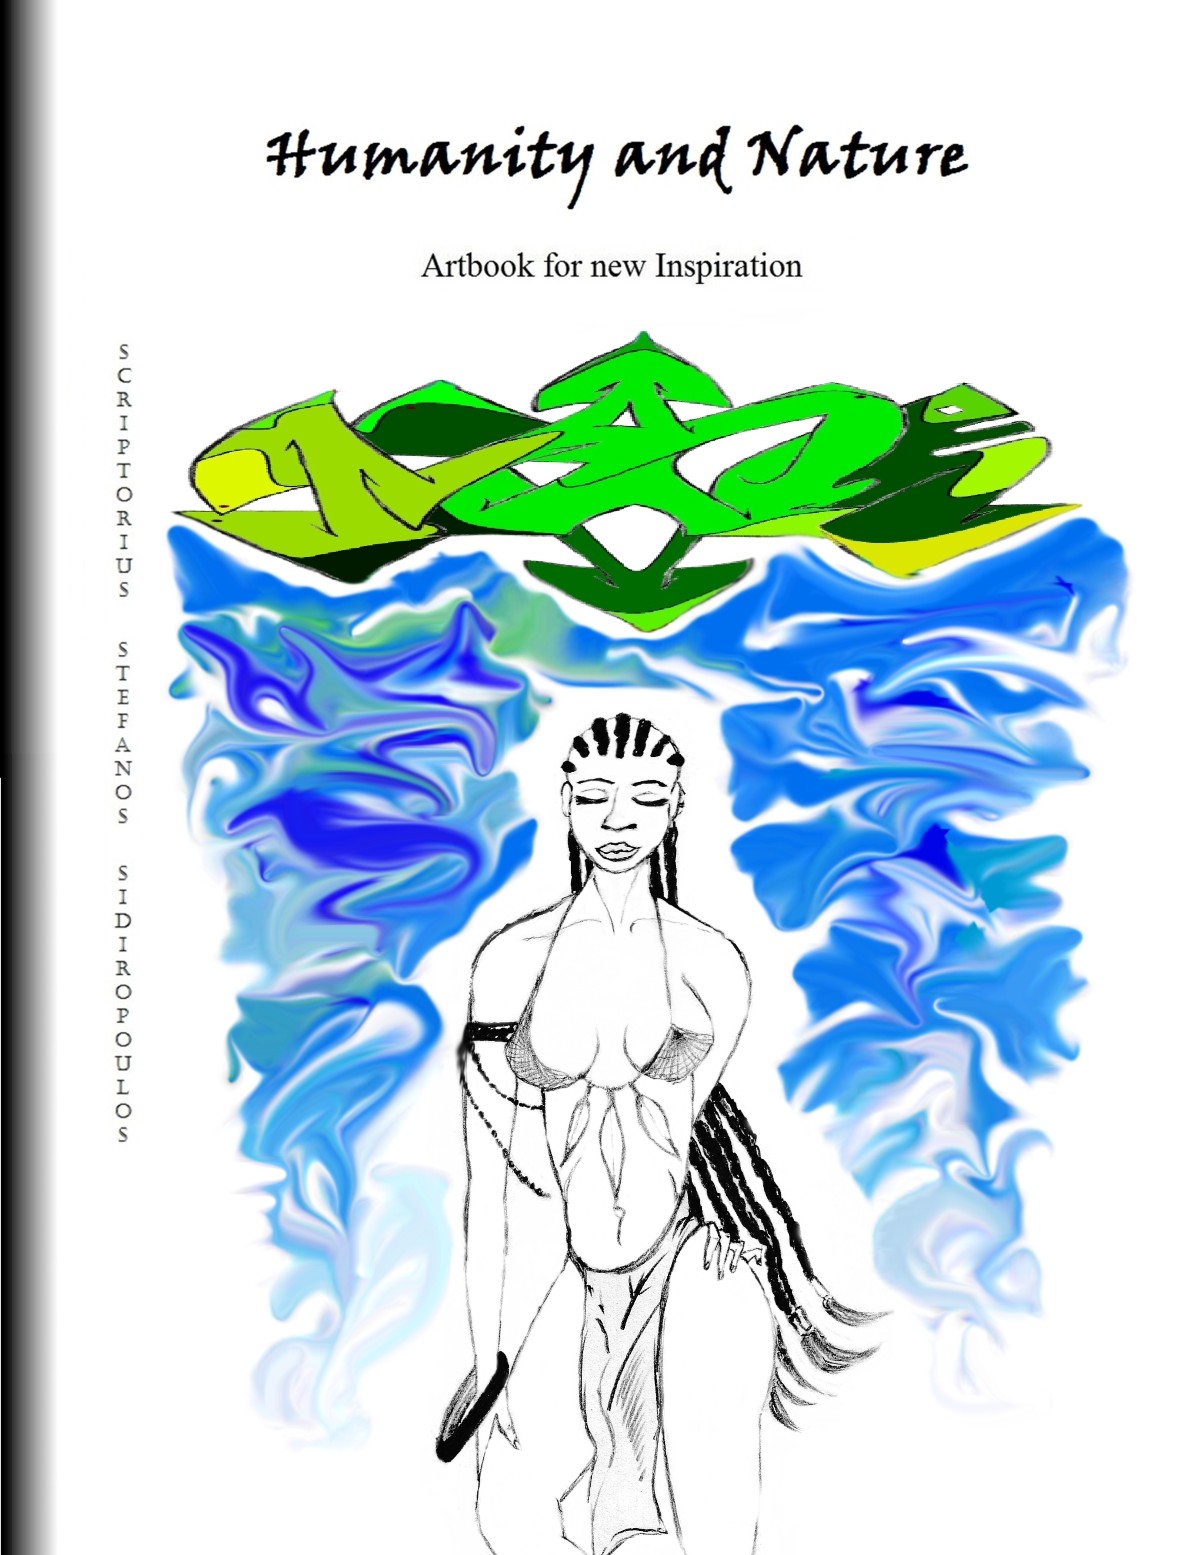 Humanity and Nature: Artbook for new inspiration